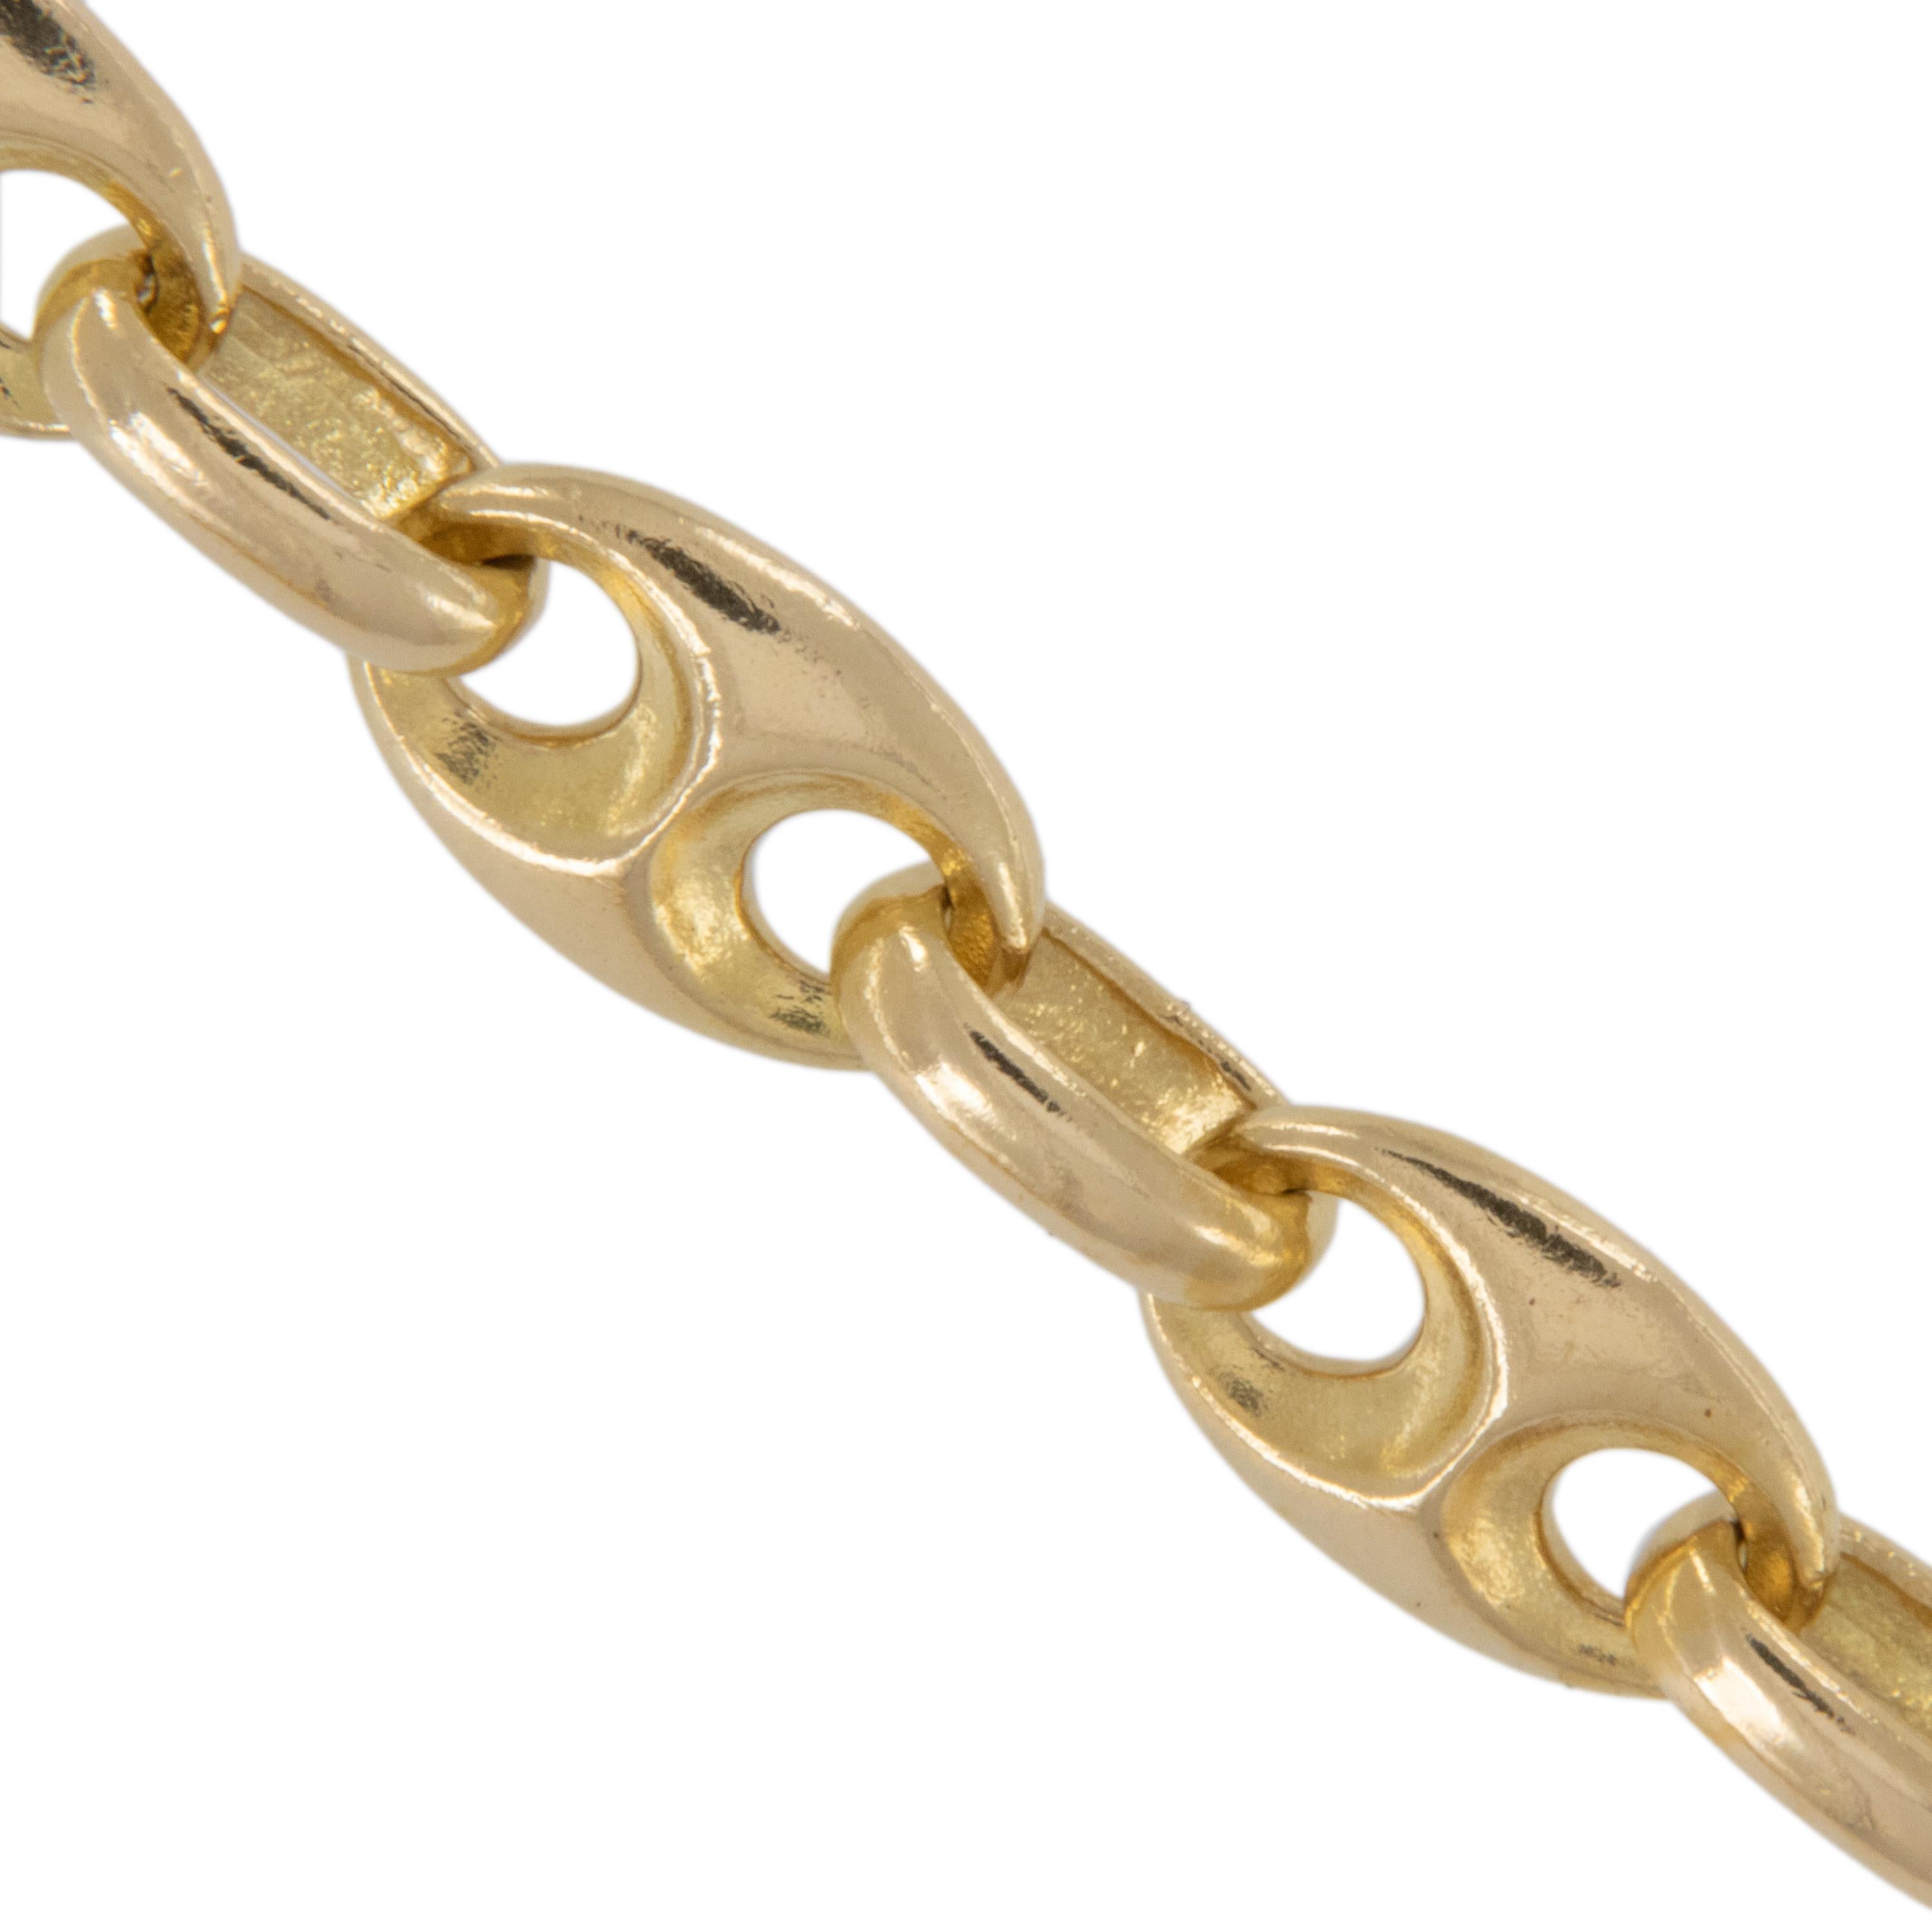 A rare and highly sought after Van Cleef & Arpels, Heavy and solid 18k yellow gold Gucci style anchor chain necklace, c. 1975. Classic necklace is 30